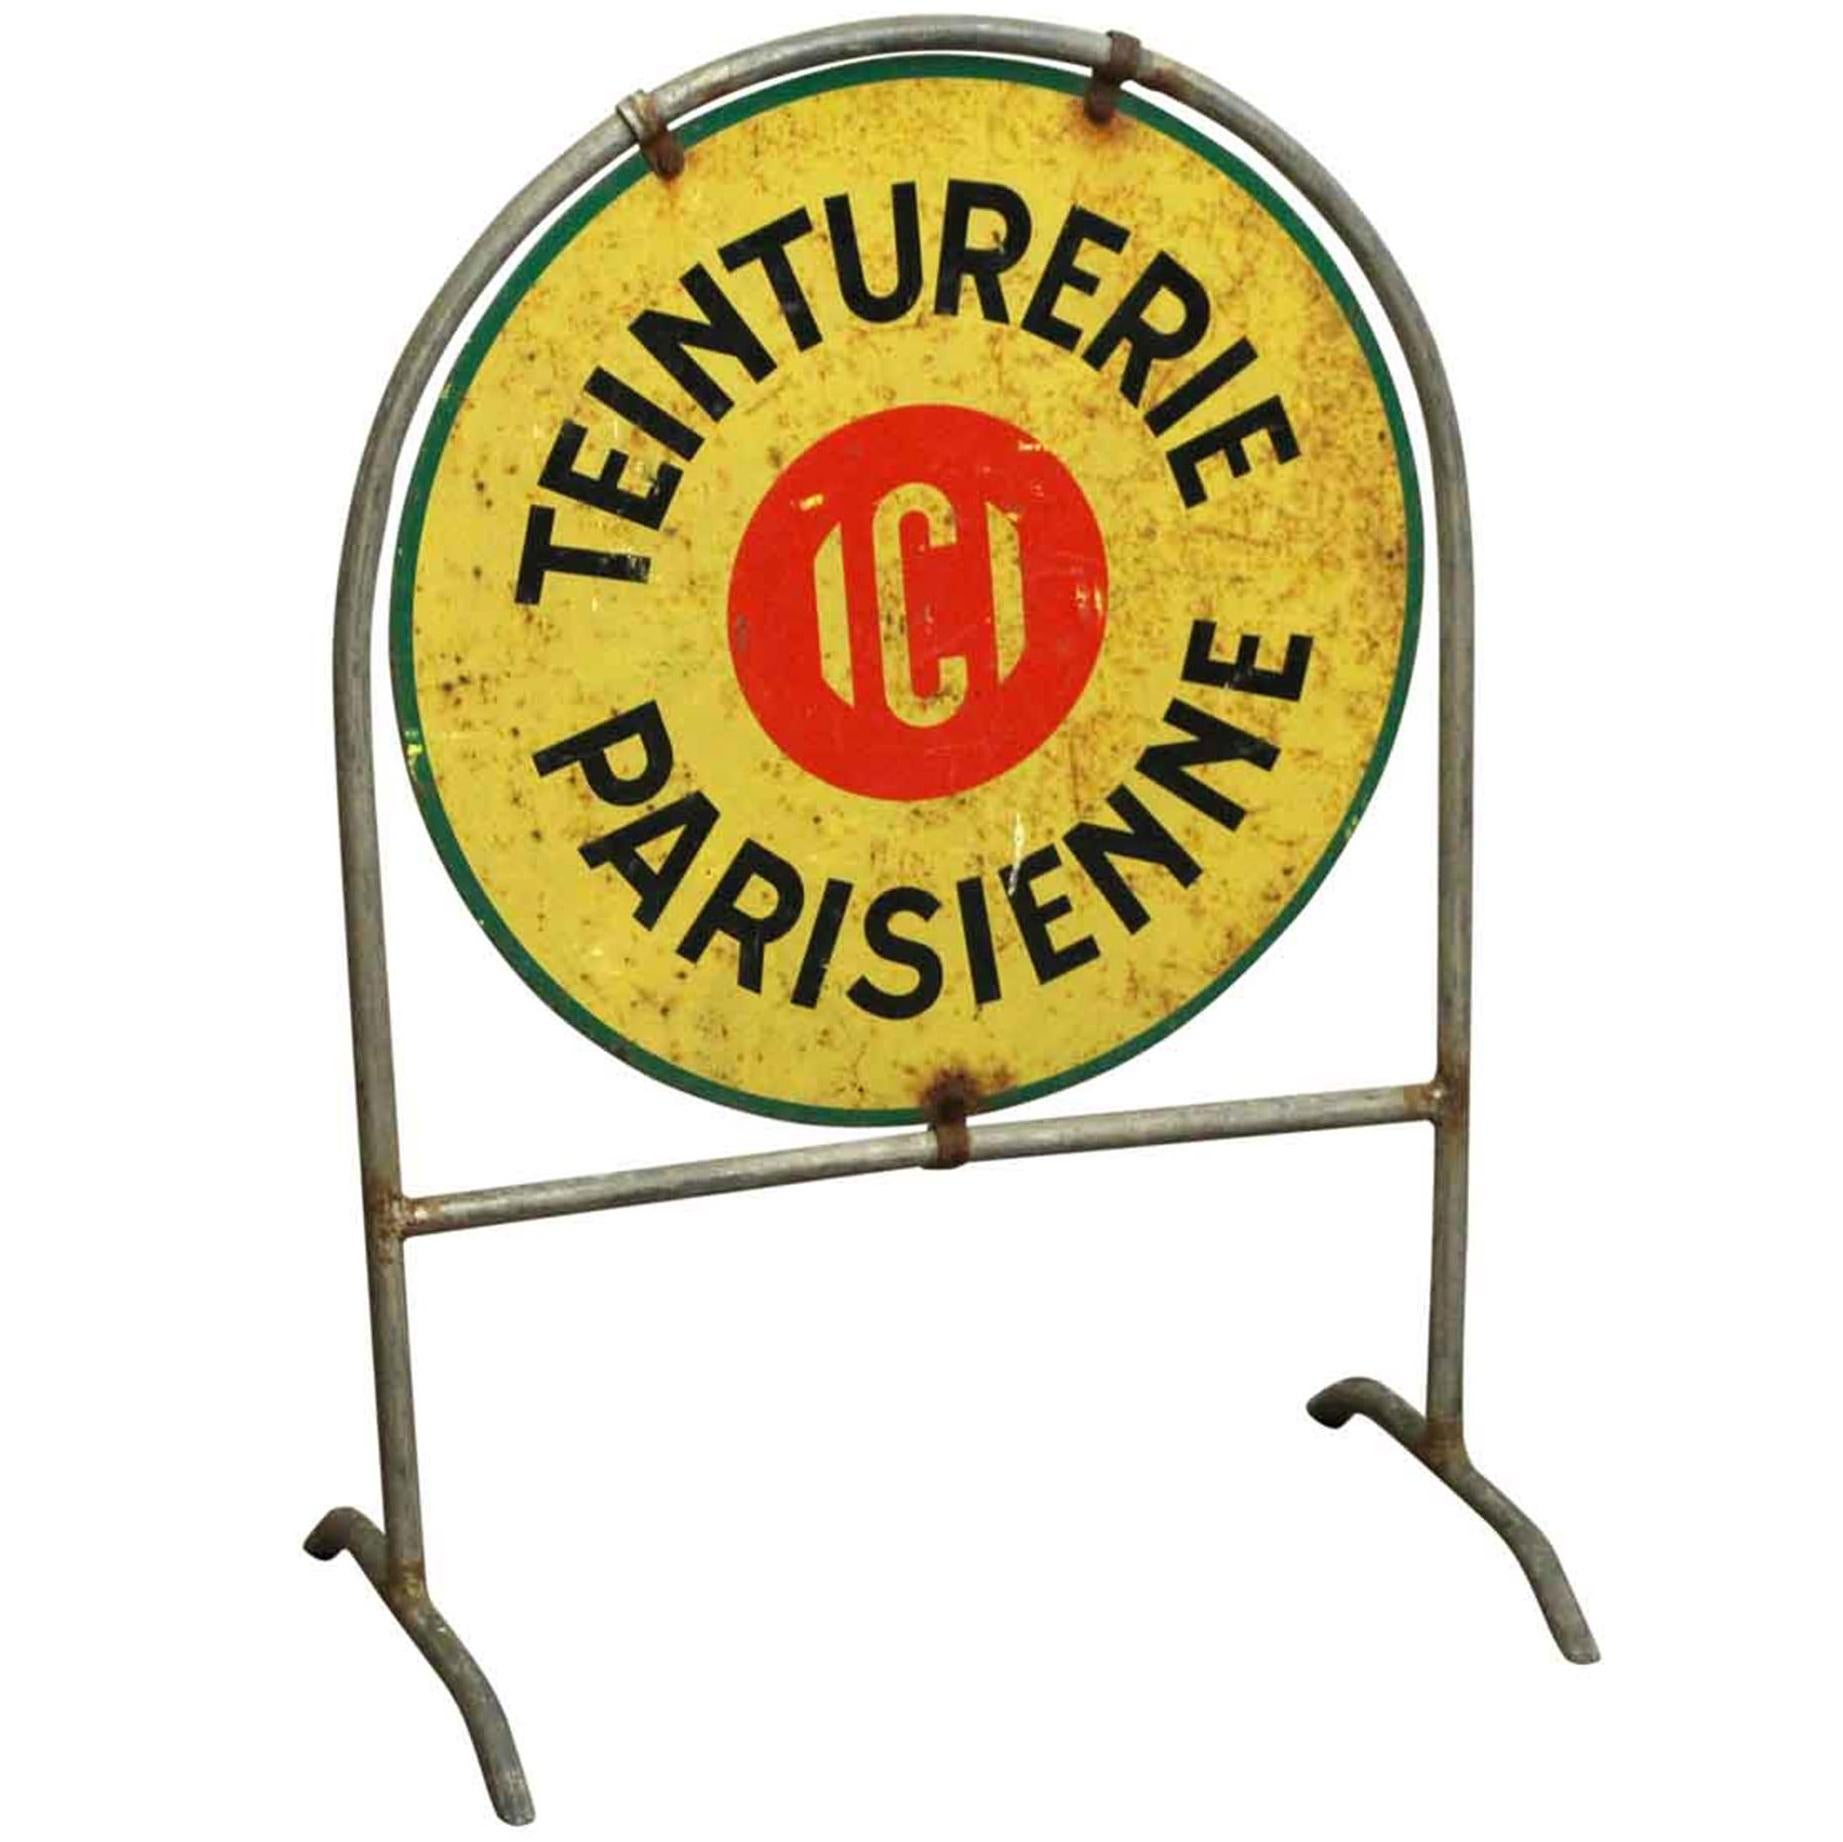 1960s Teinturerie Parisienne or "Parisian Dry Cleaners" Sign from France